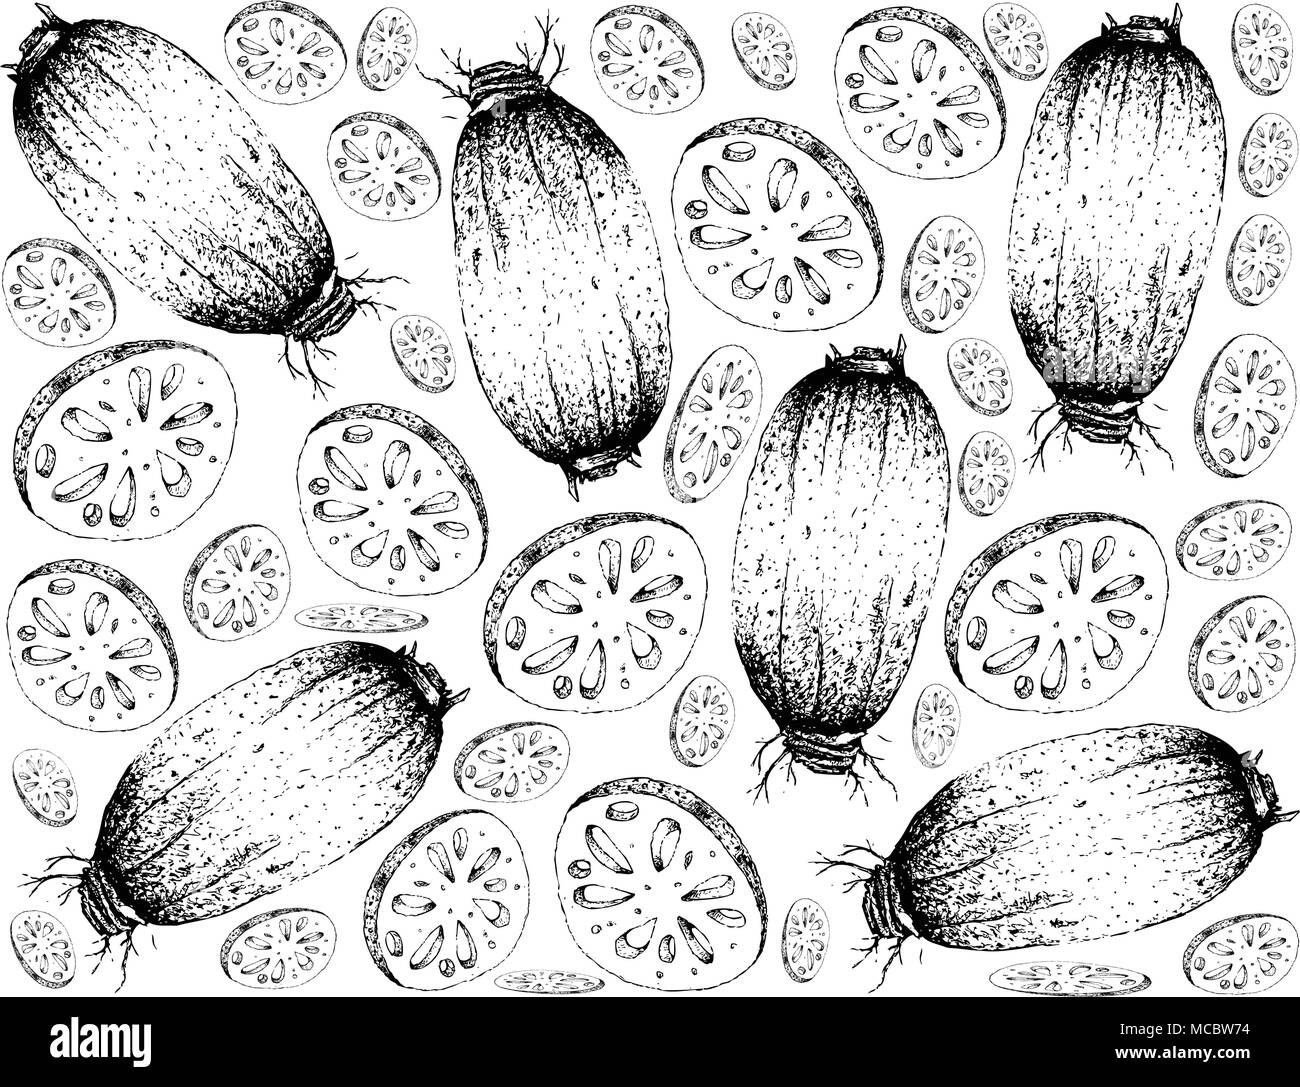 Bulb Vegetable, Illustration Wallpaper Background of Hand Drawn Sketch Sliced Lotus or Water Lily Roots. Stock Vector